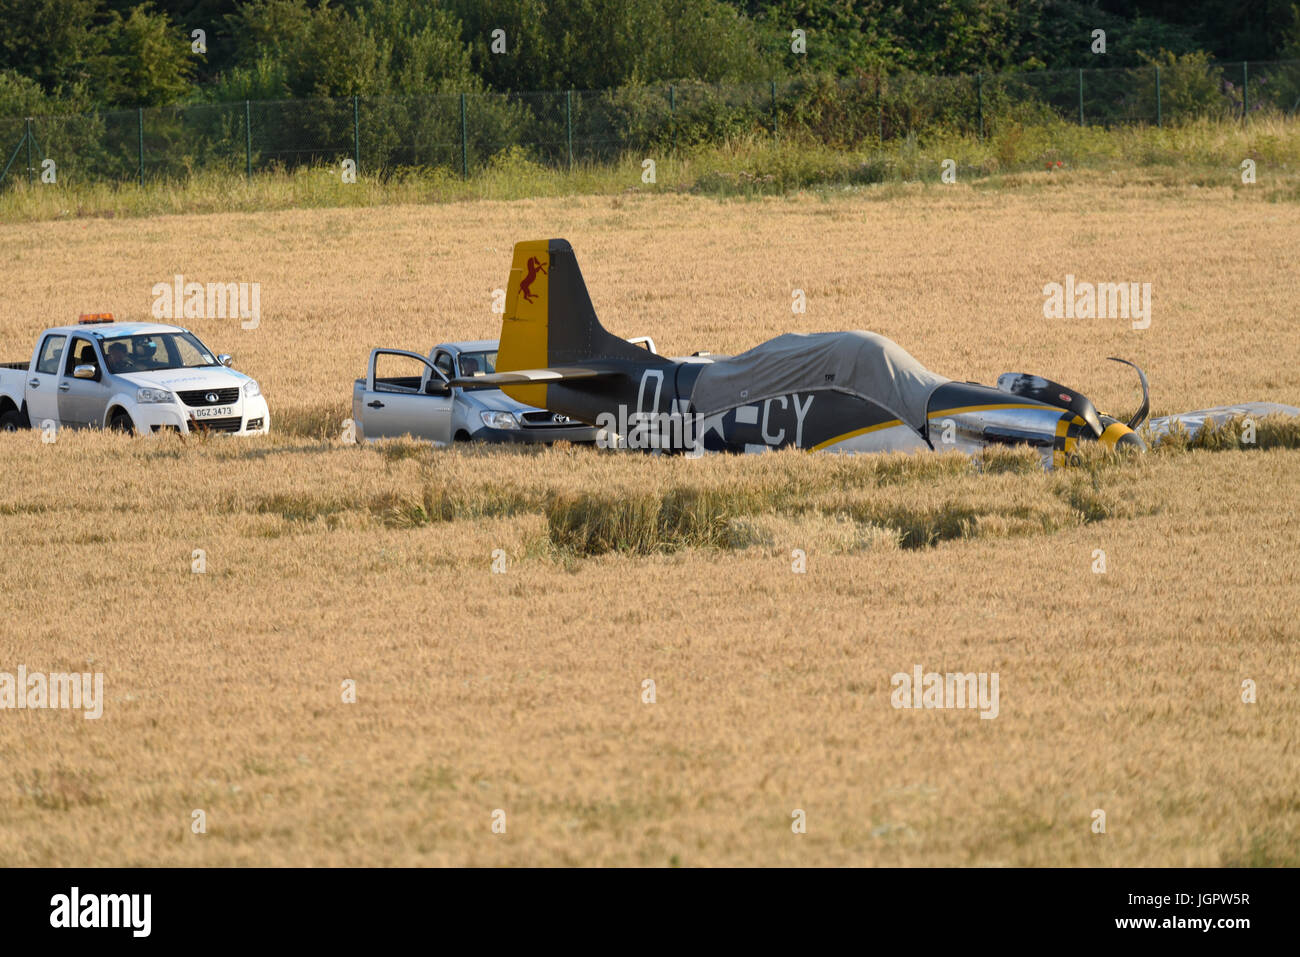 The pilot of a wartime North American P-51 Mustang fighter plane named 'Miss Velma' made a successful forced landing into a field after suffering engine failure upon completion of a display at an airshow Stock Photo